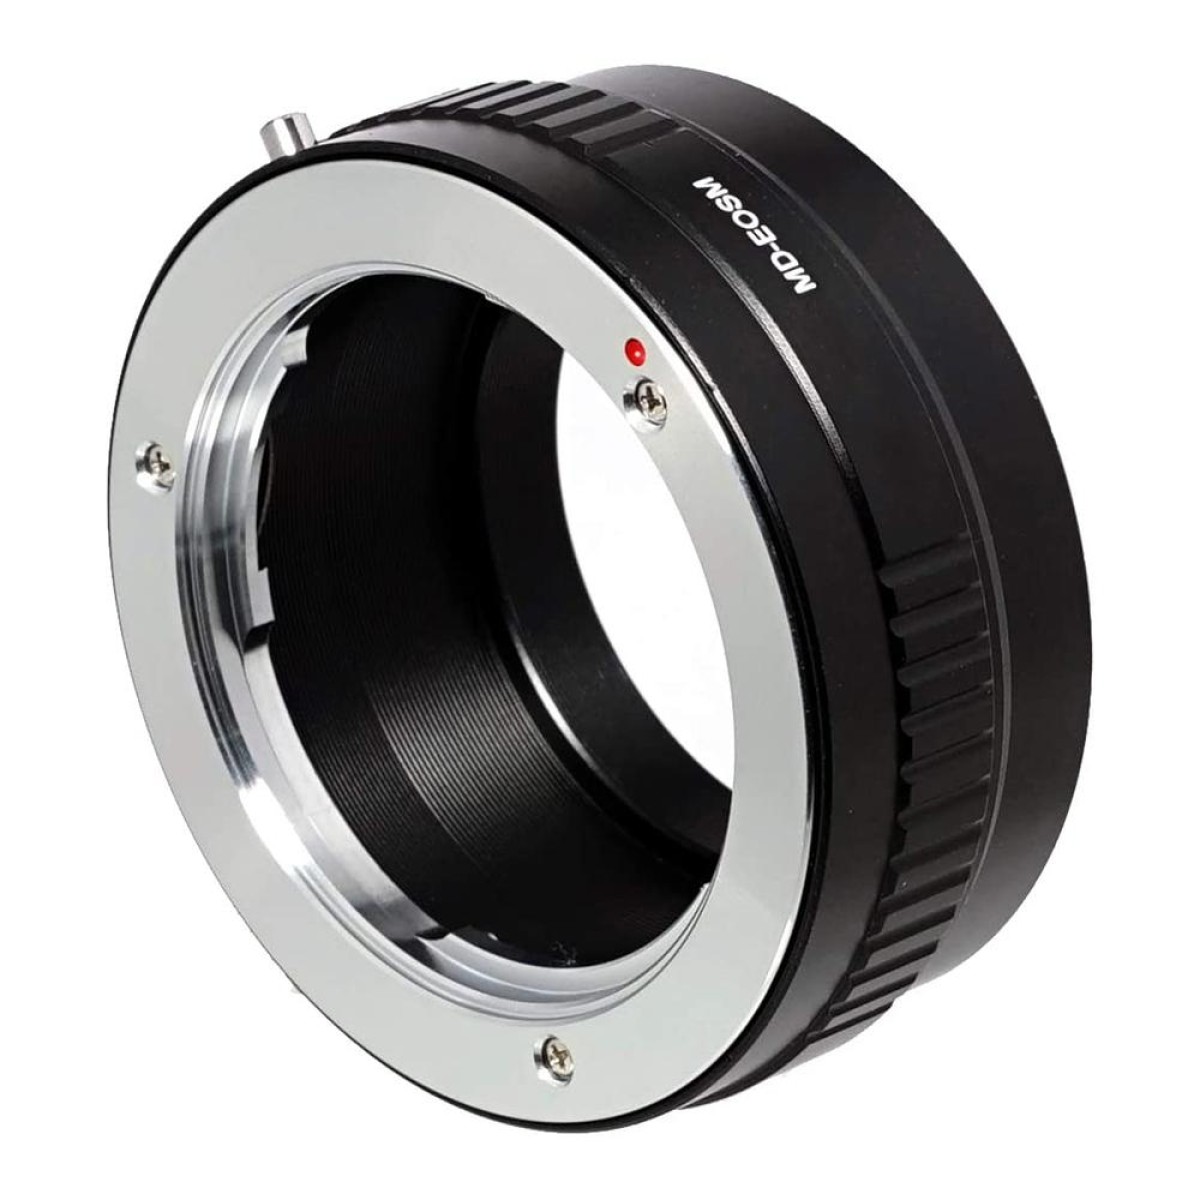 MD Lens to EOS M Lens Mount Stepping Ring(Black)